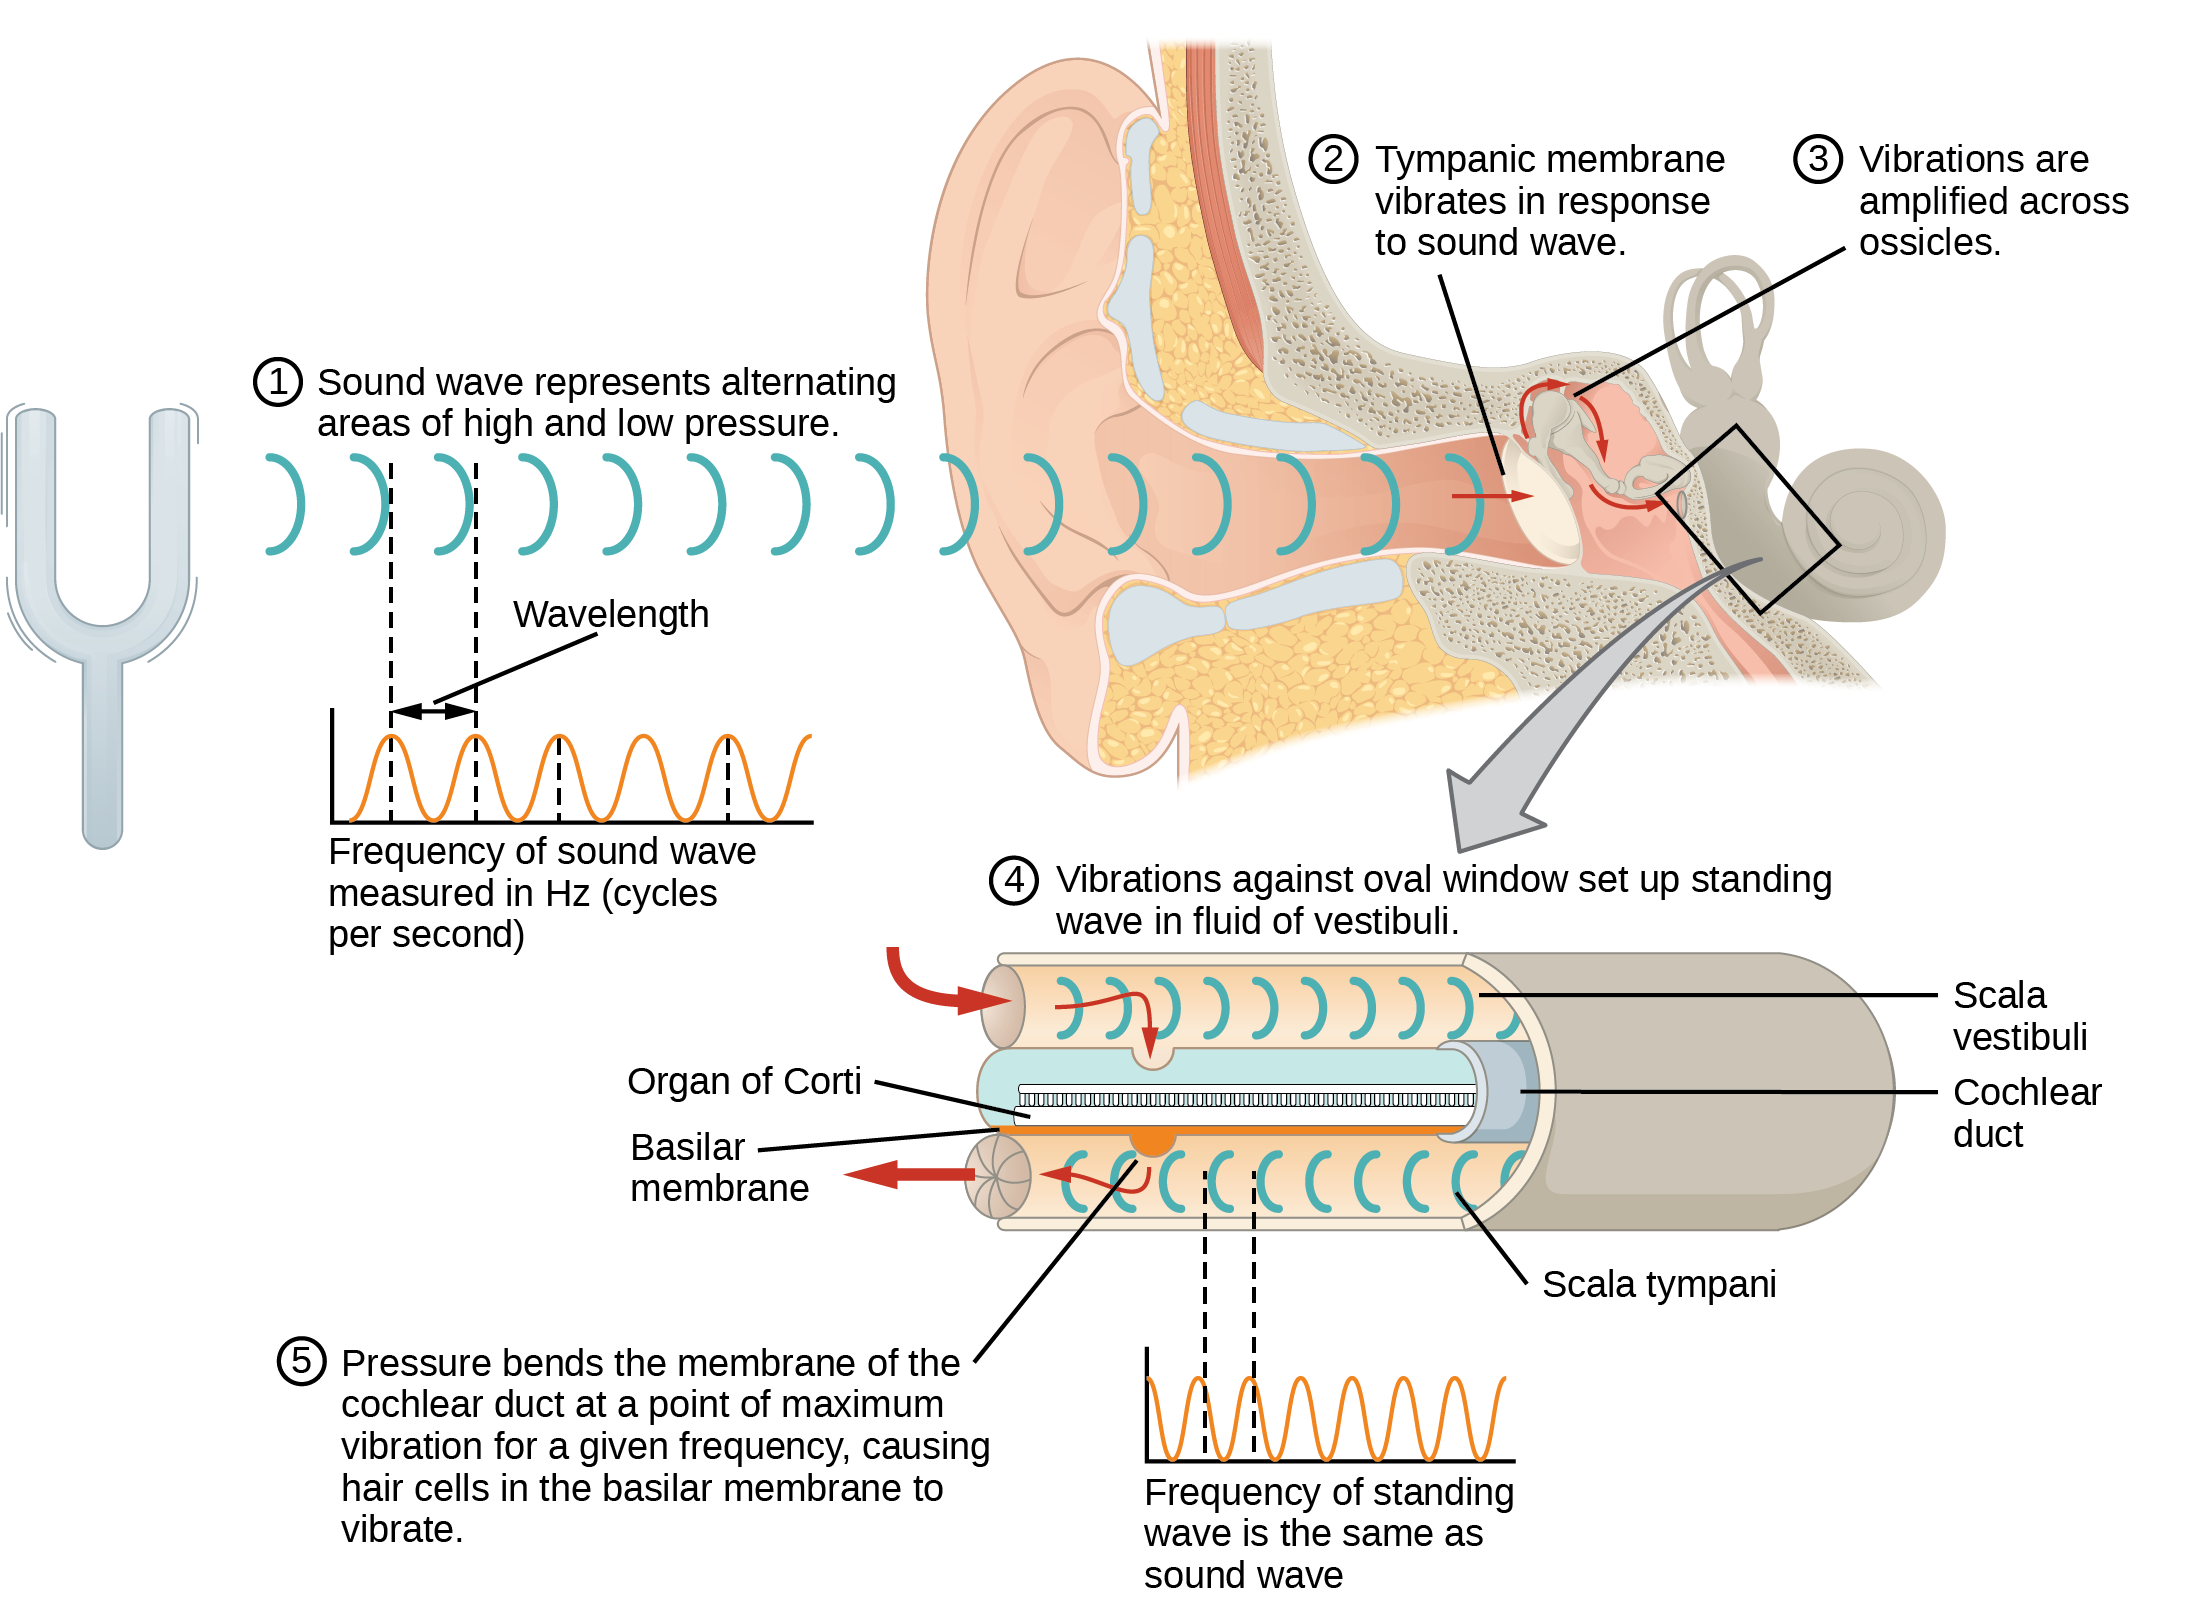 This diagram shows how sound waves travel through the ear, and each step details the process. A sound wave causes the tympanic membrane to vibrate. This vibration is amplified as it moves across the malleus, incus, and stapes. The amplified vibration is picked up by the oval window causing pressure waves in the fluid of the scala vestibuli and scala tympani. The complexity of the pressure waves is determined by the changes in amplitude and frequency of the sound waves entering the ear.